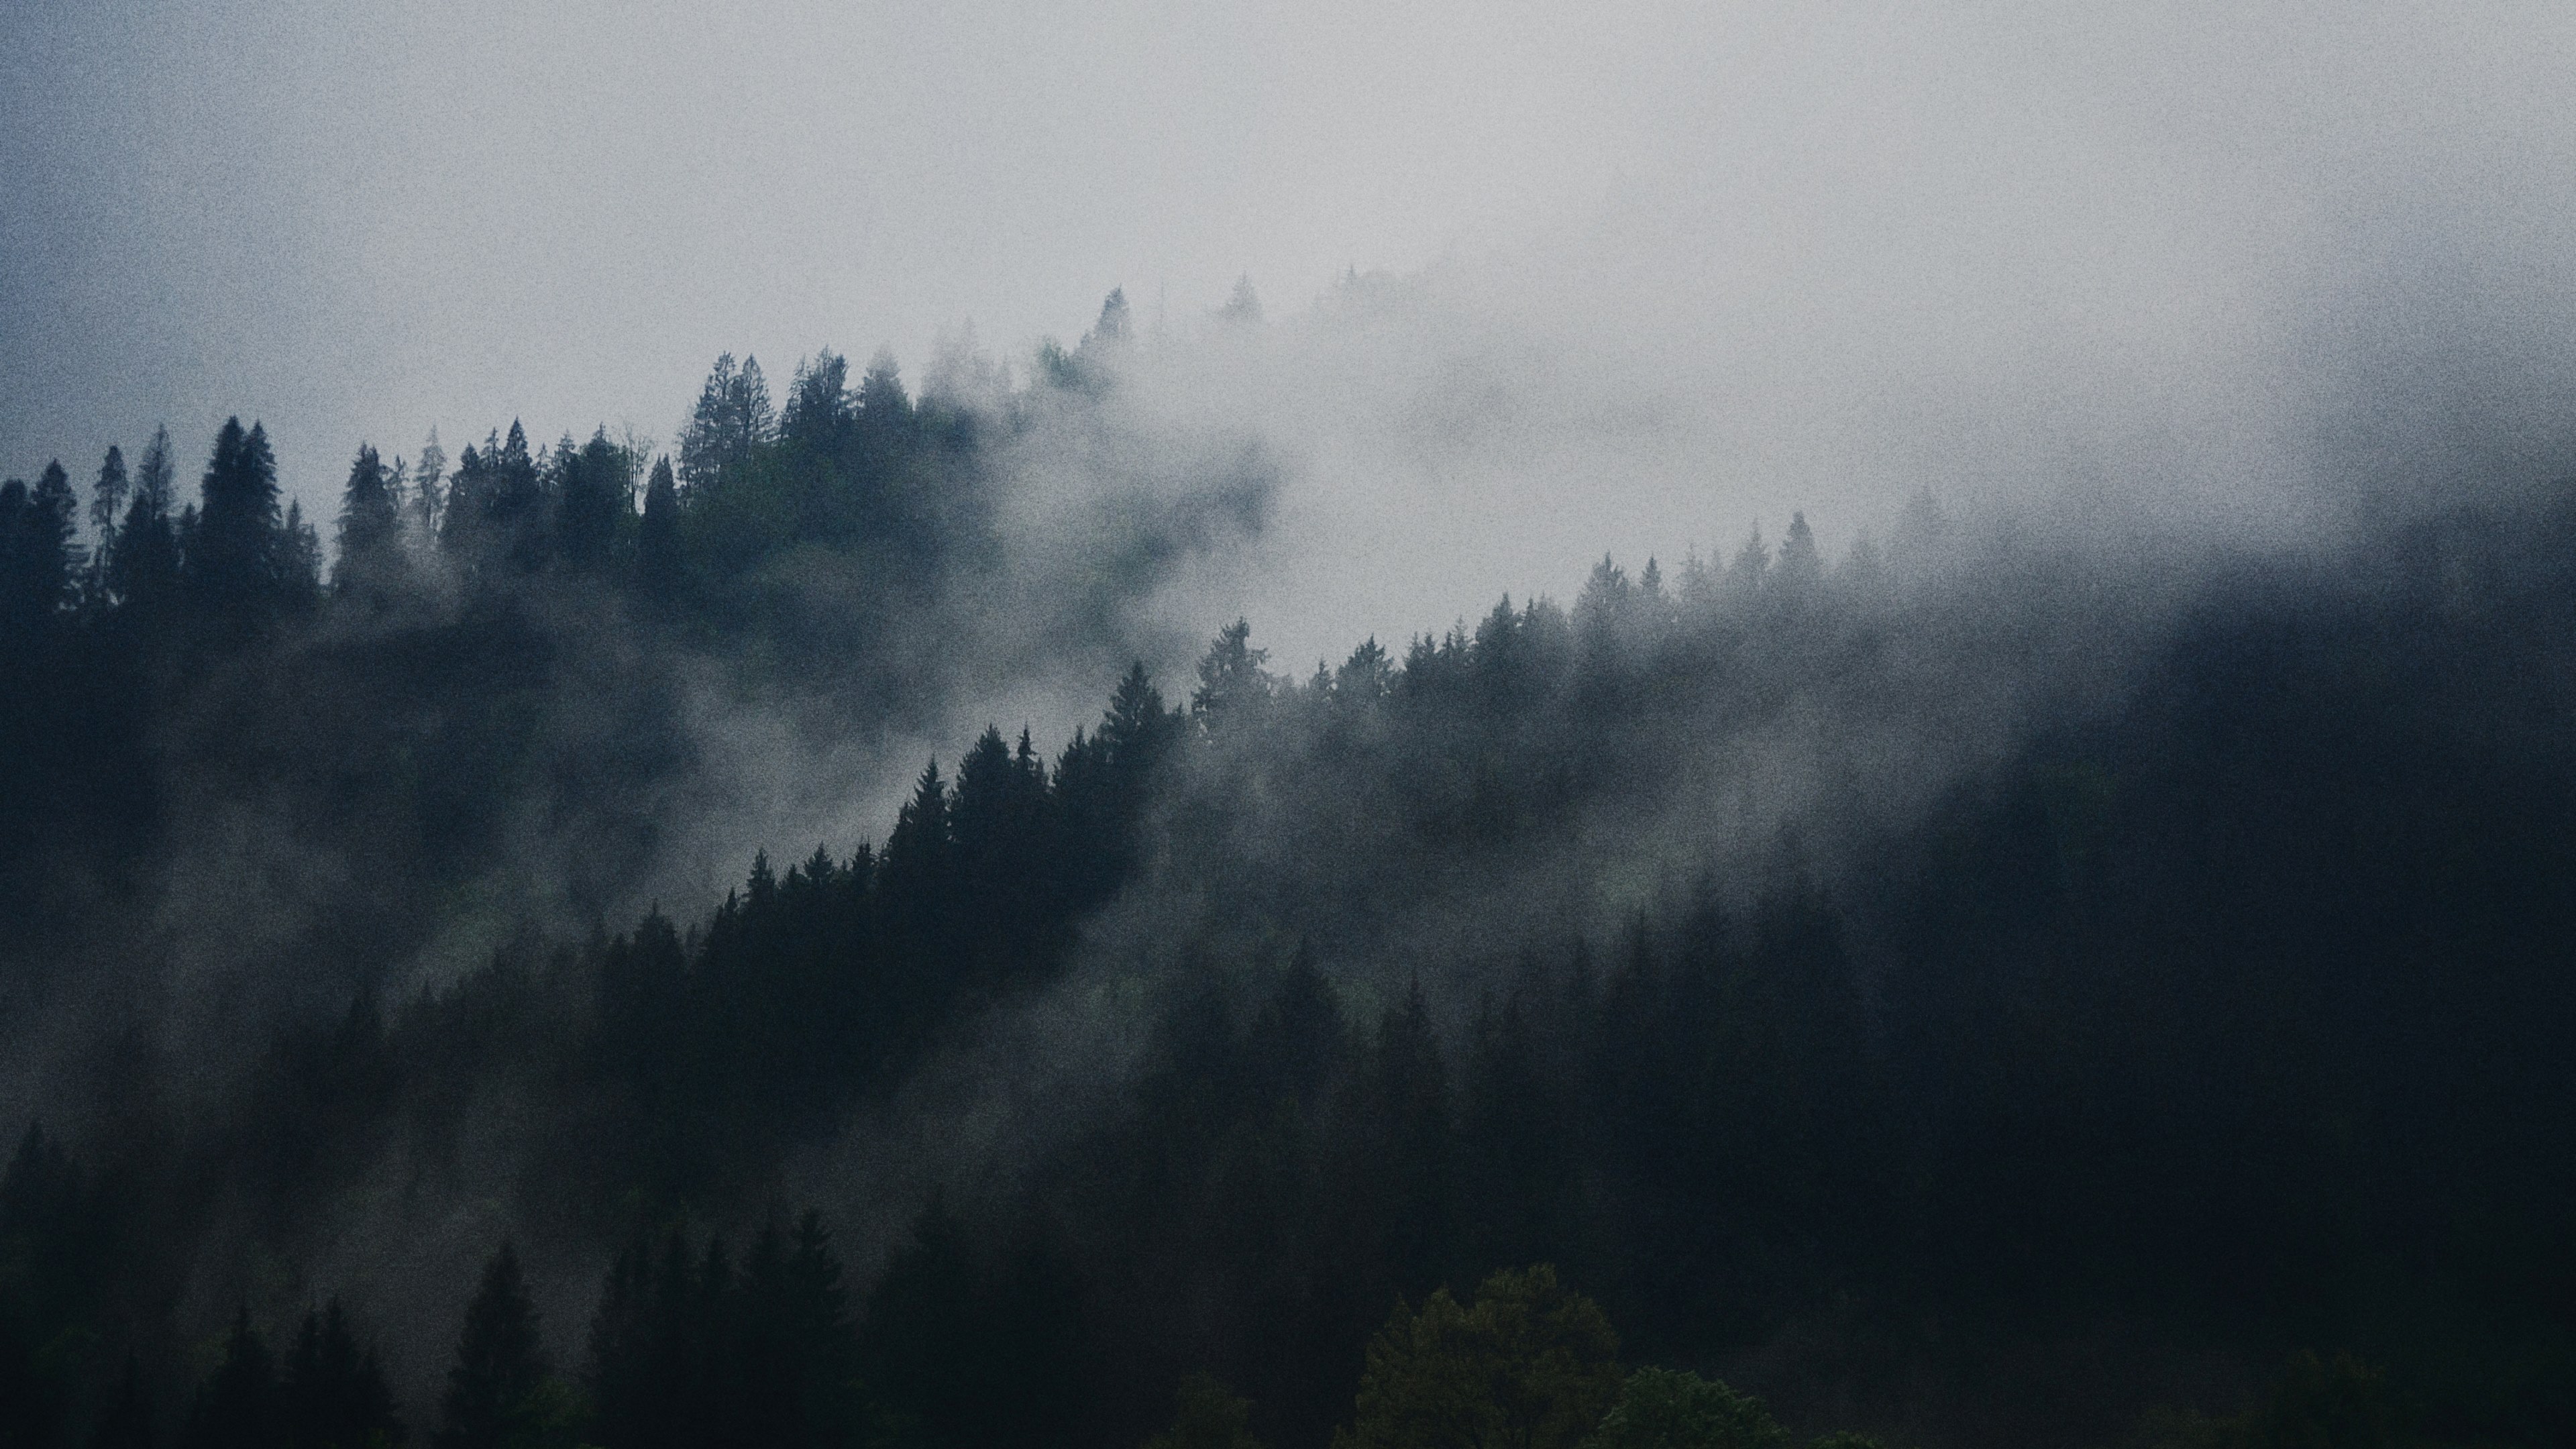 A foggy forest of pine trees. - Foggy forest, fog